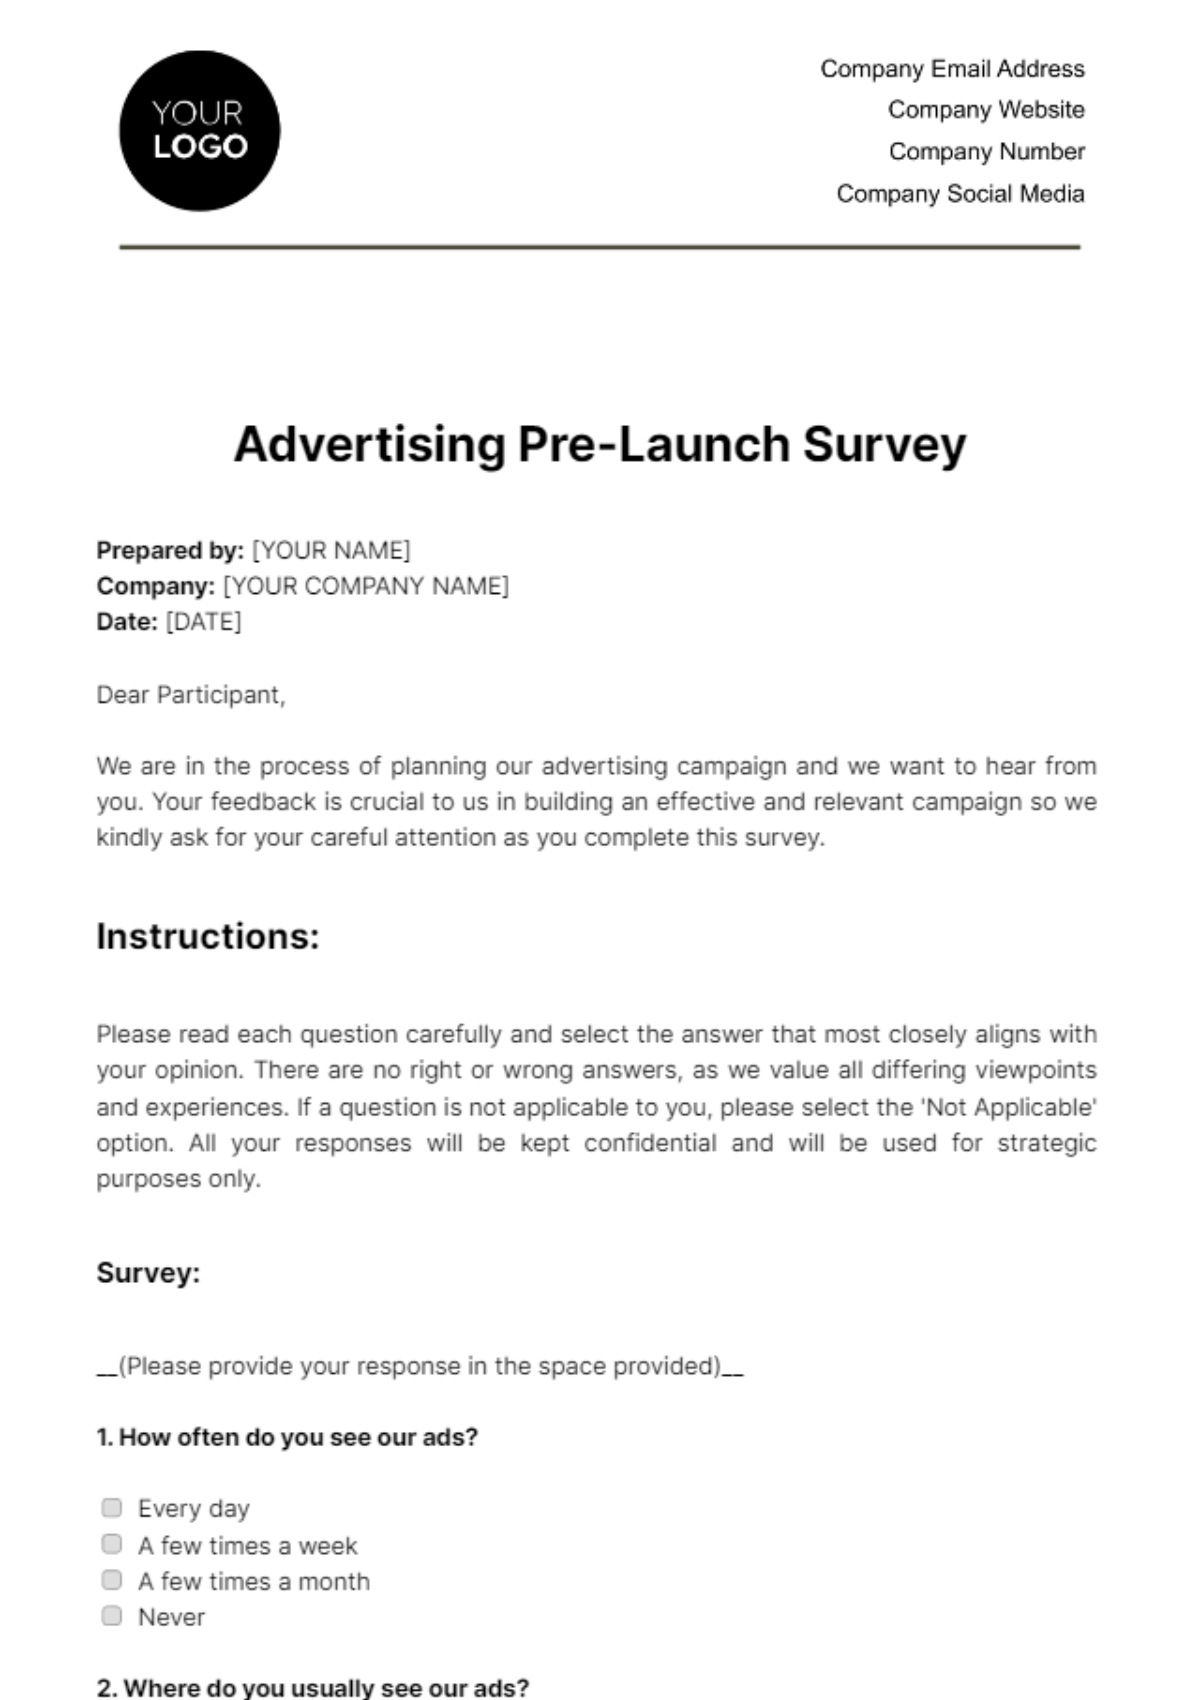 Free Advertising Pre-Launch Survey Template